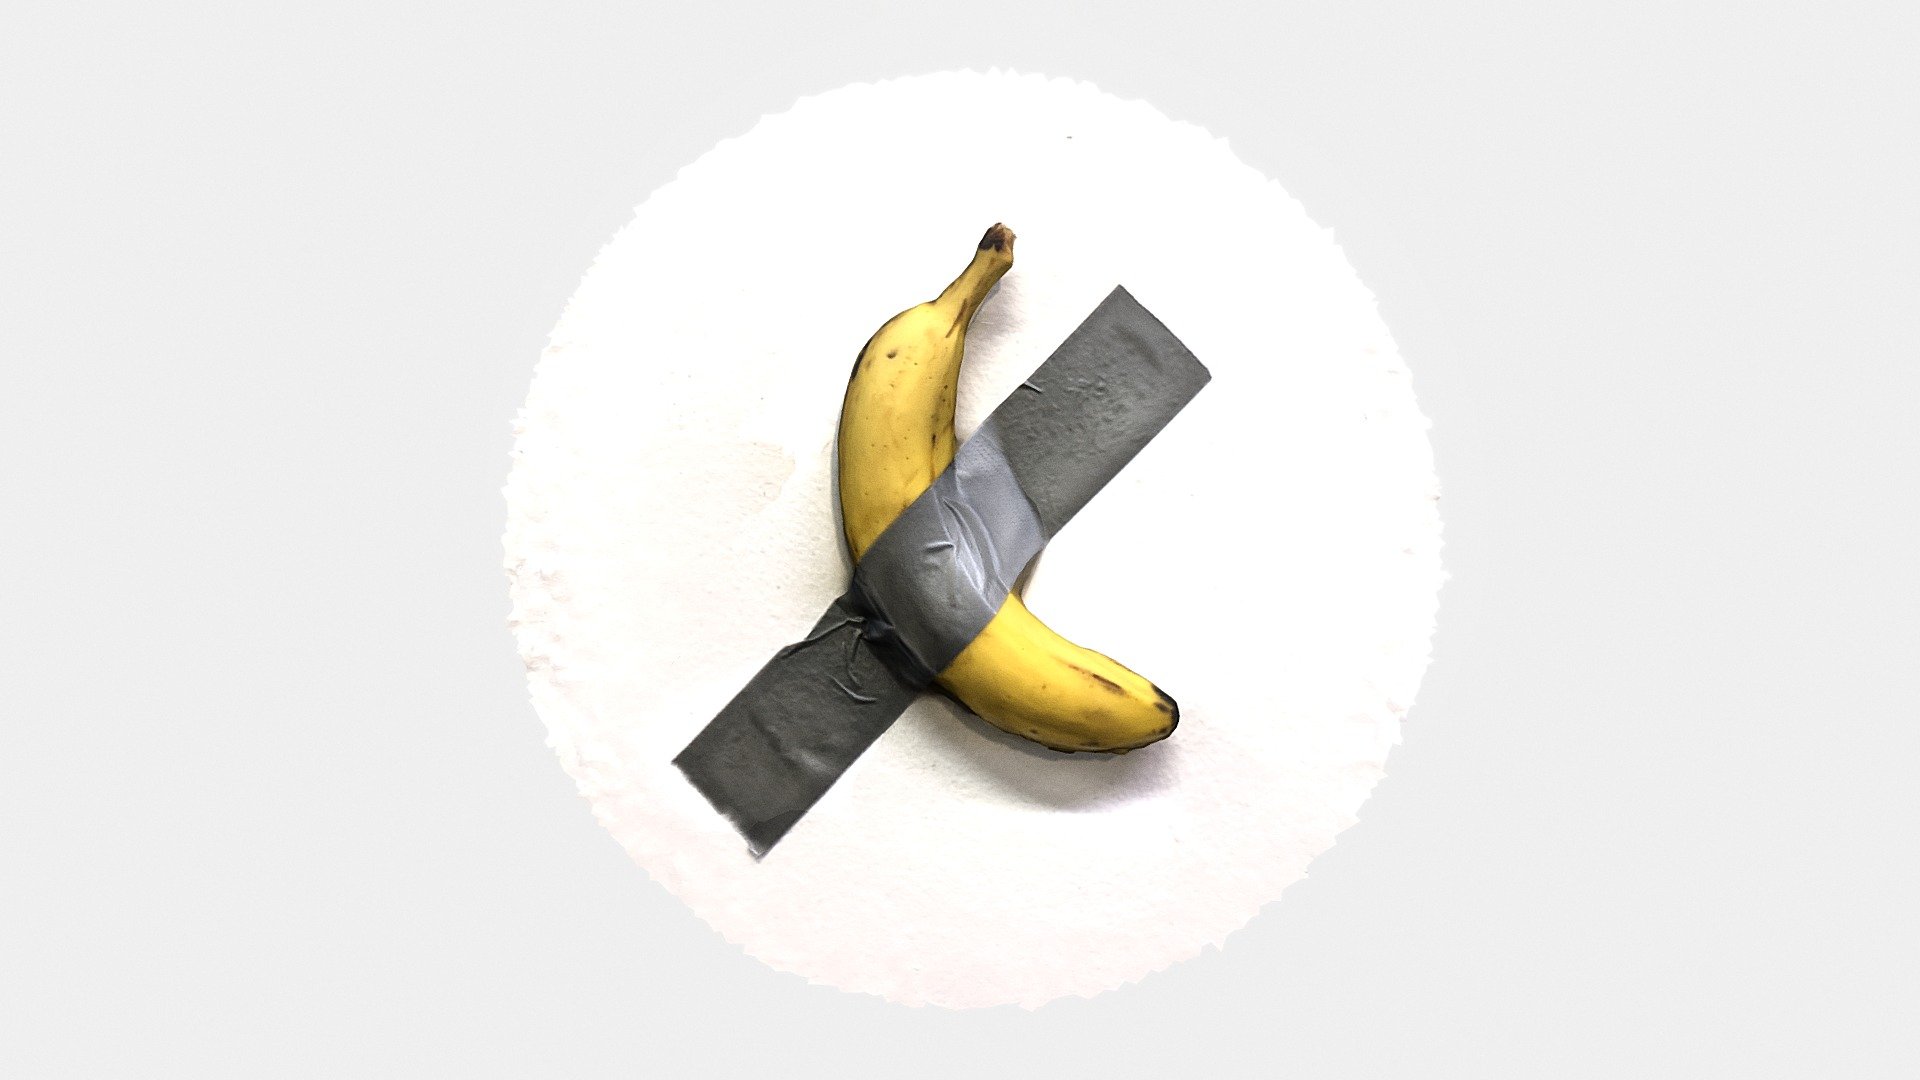 Also it can't be eaten

Taped banana on the white wall - 80 Photos with Iphone and processed with Metashape - 3D Banana Art that won't cost you $120K - Buy Royalty Free 3D model by avi 3d model